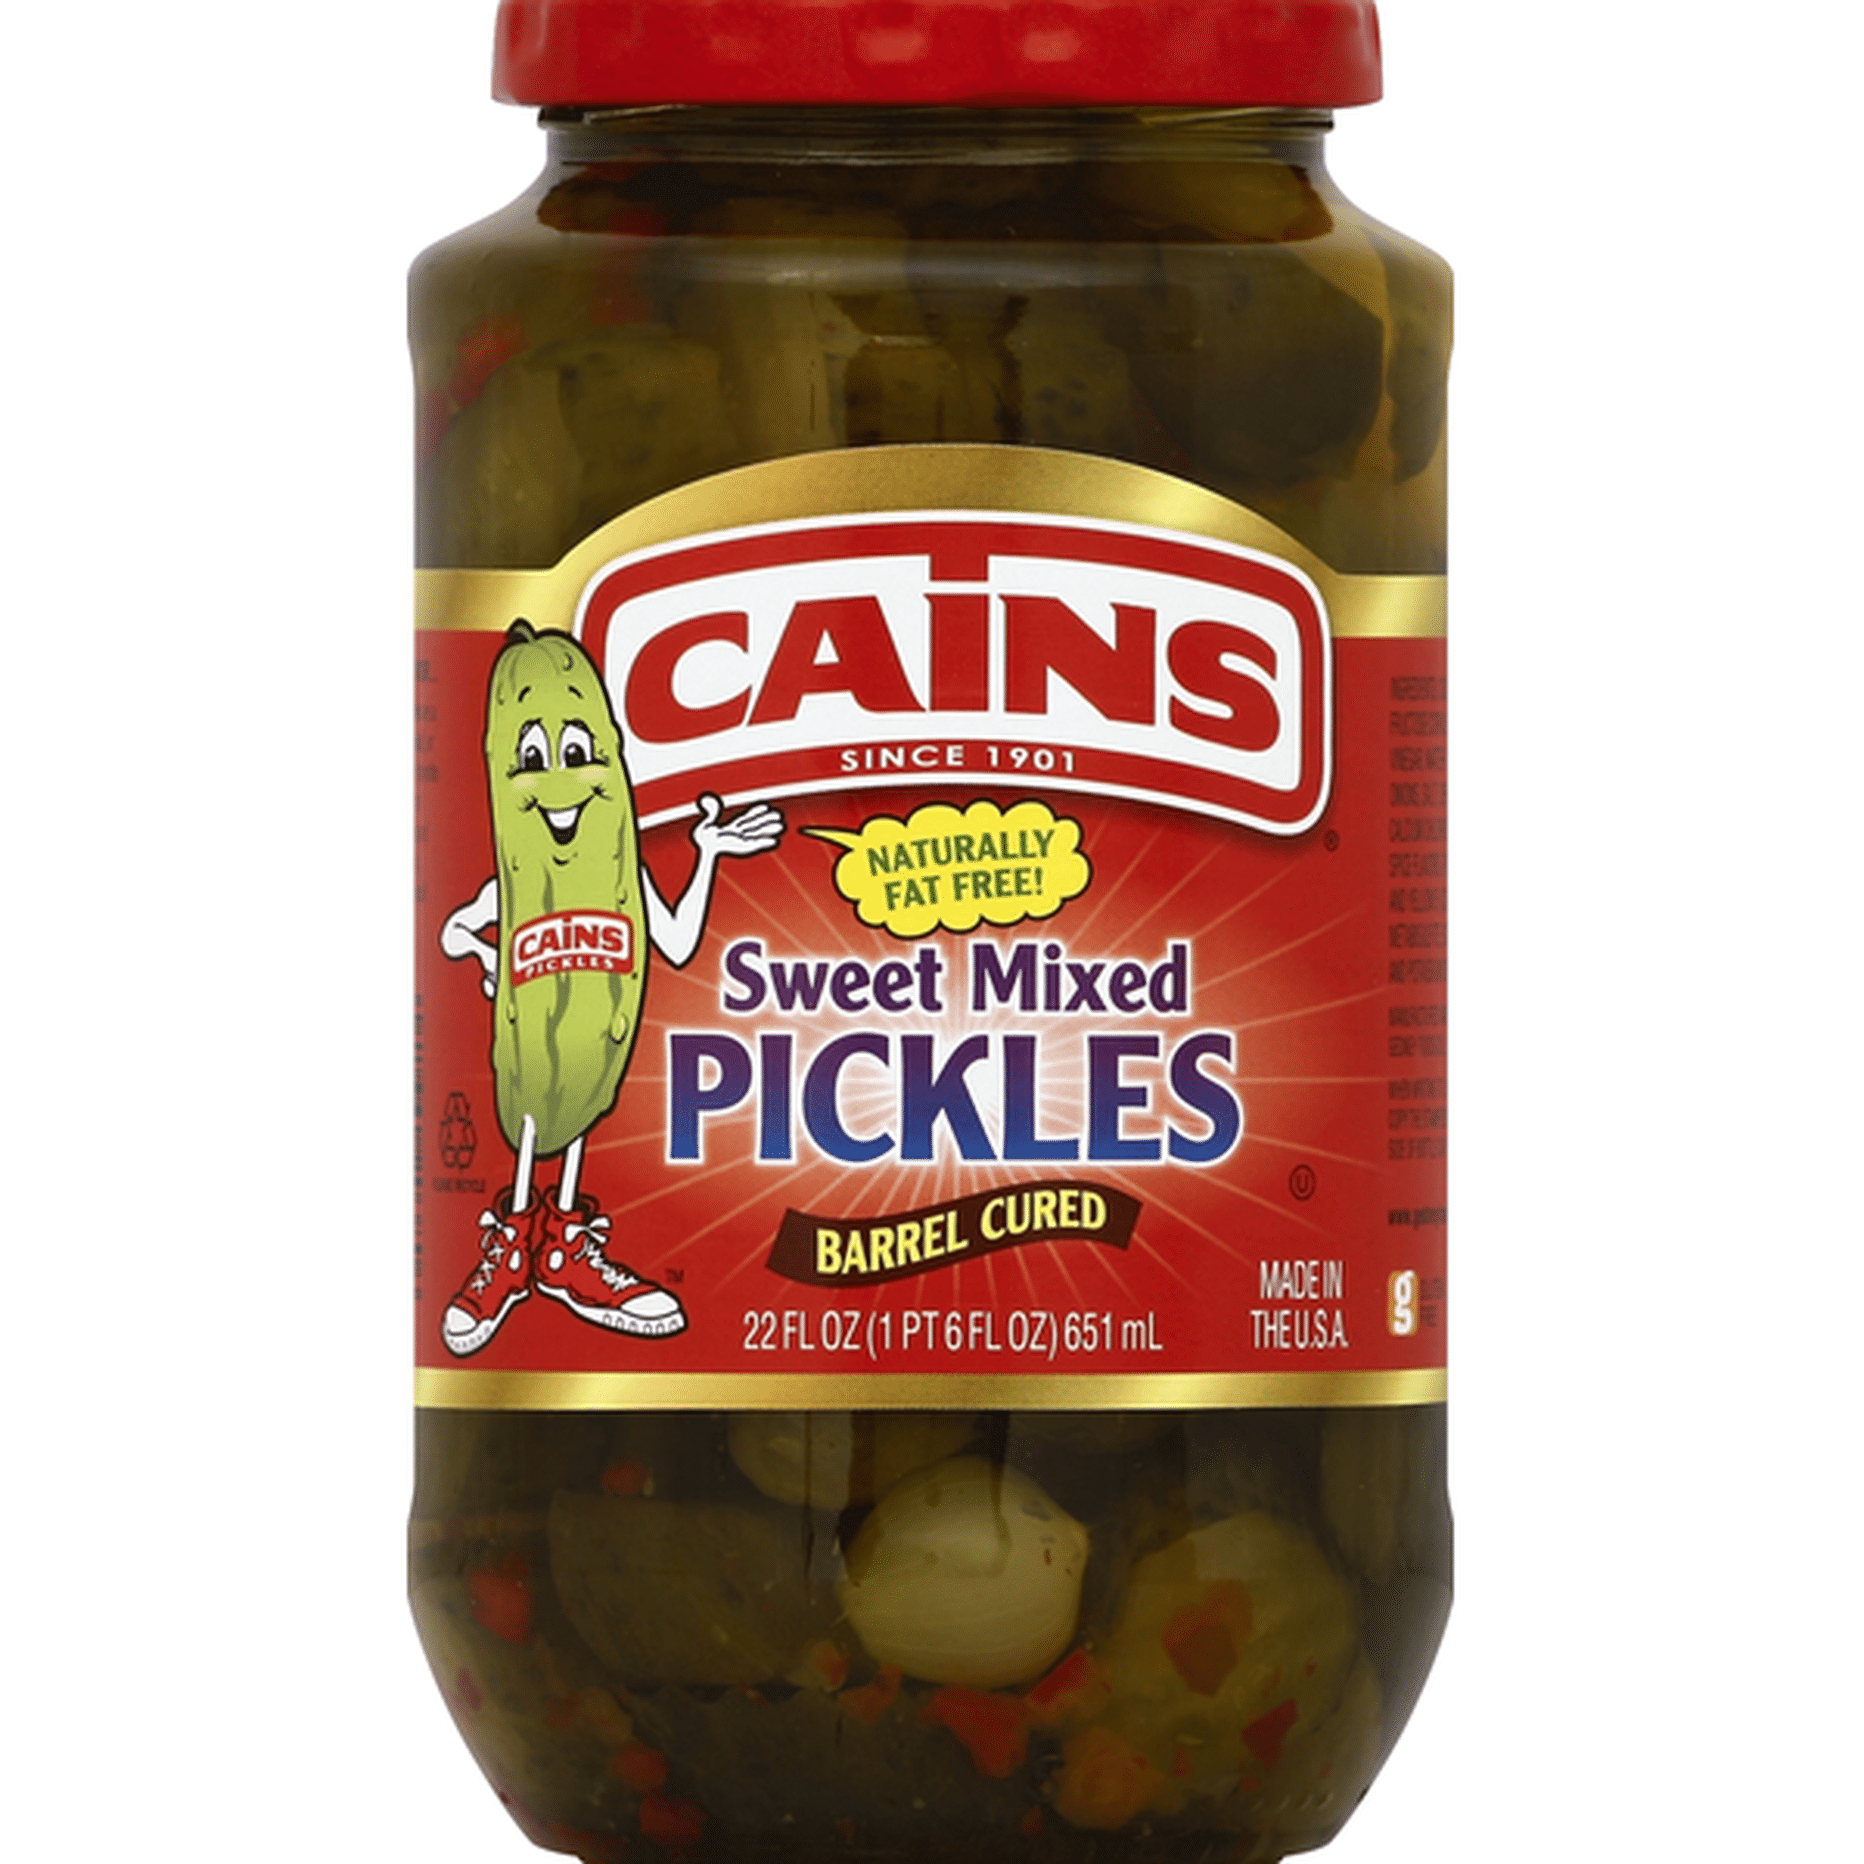 cains-pickles-sweet-mixed-barrel-cured-22-oz-delivery-or-pickup